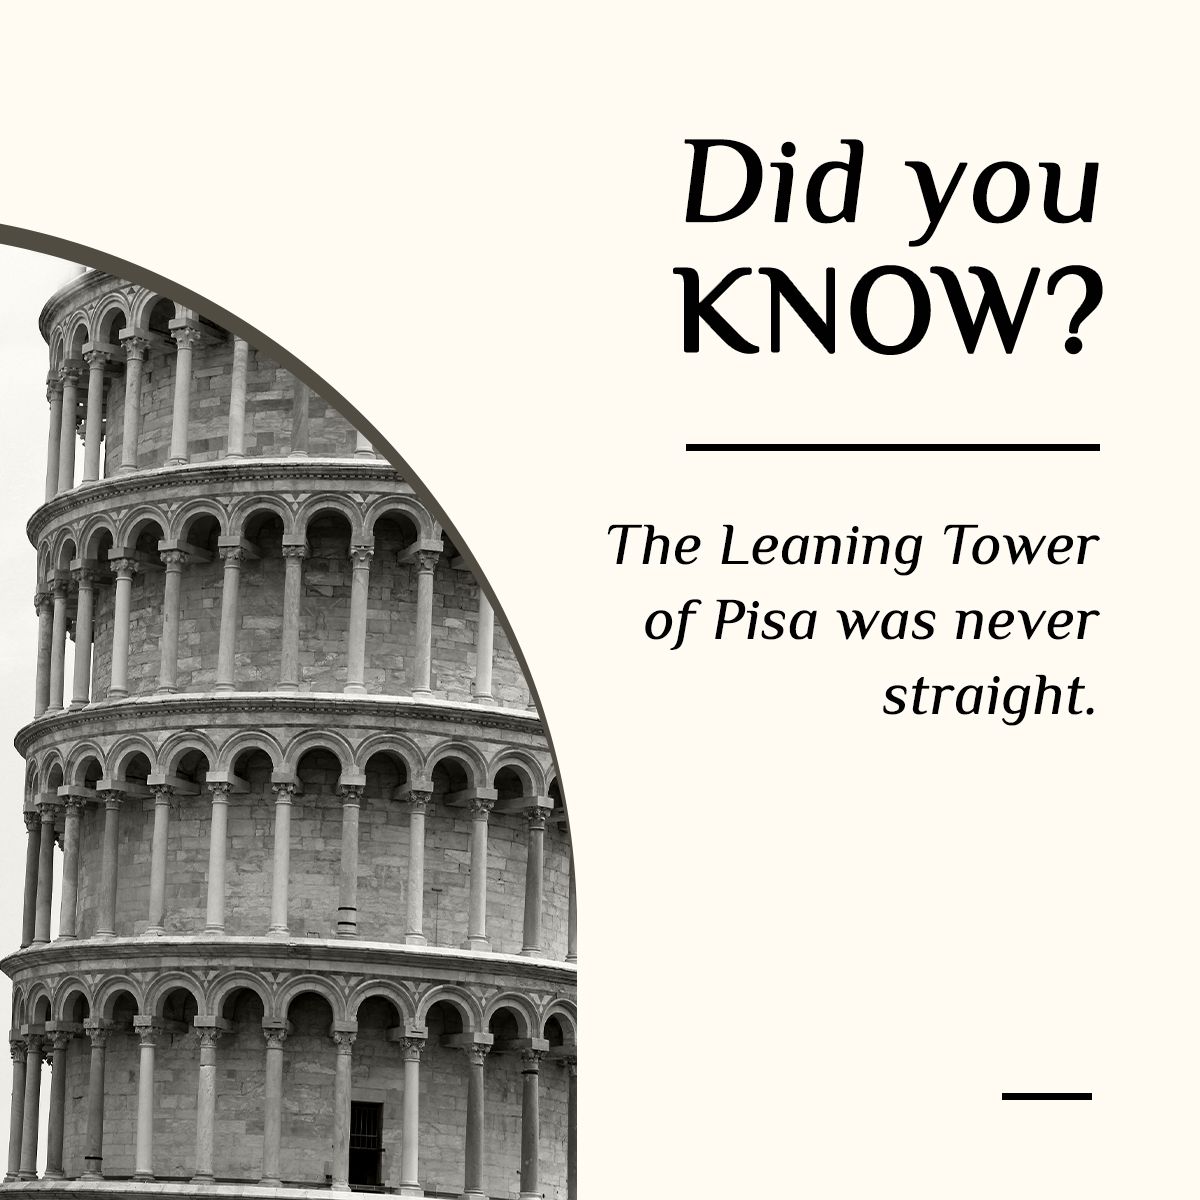 Due to the unstable ground, the tower started to lean When construction on the second story started.

#historicalfacts #didyouknow